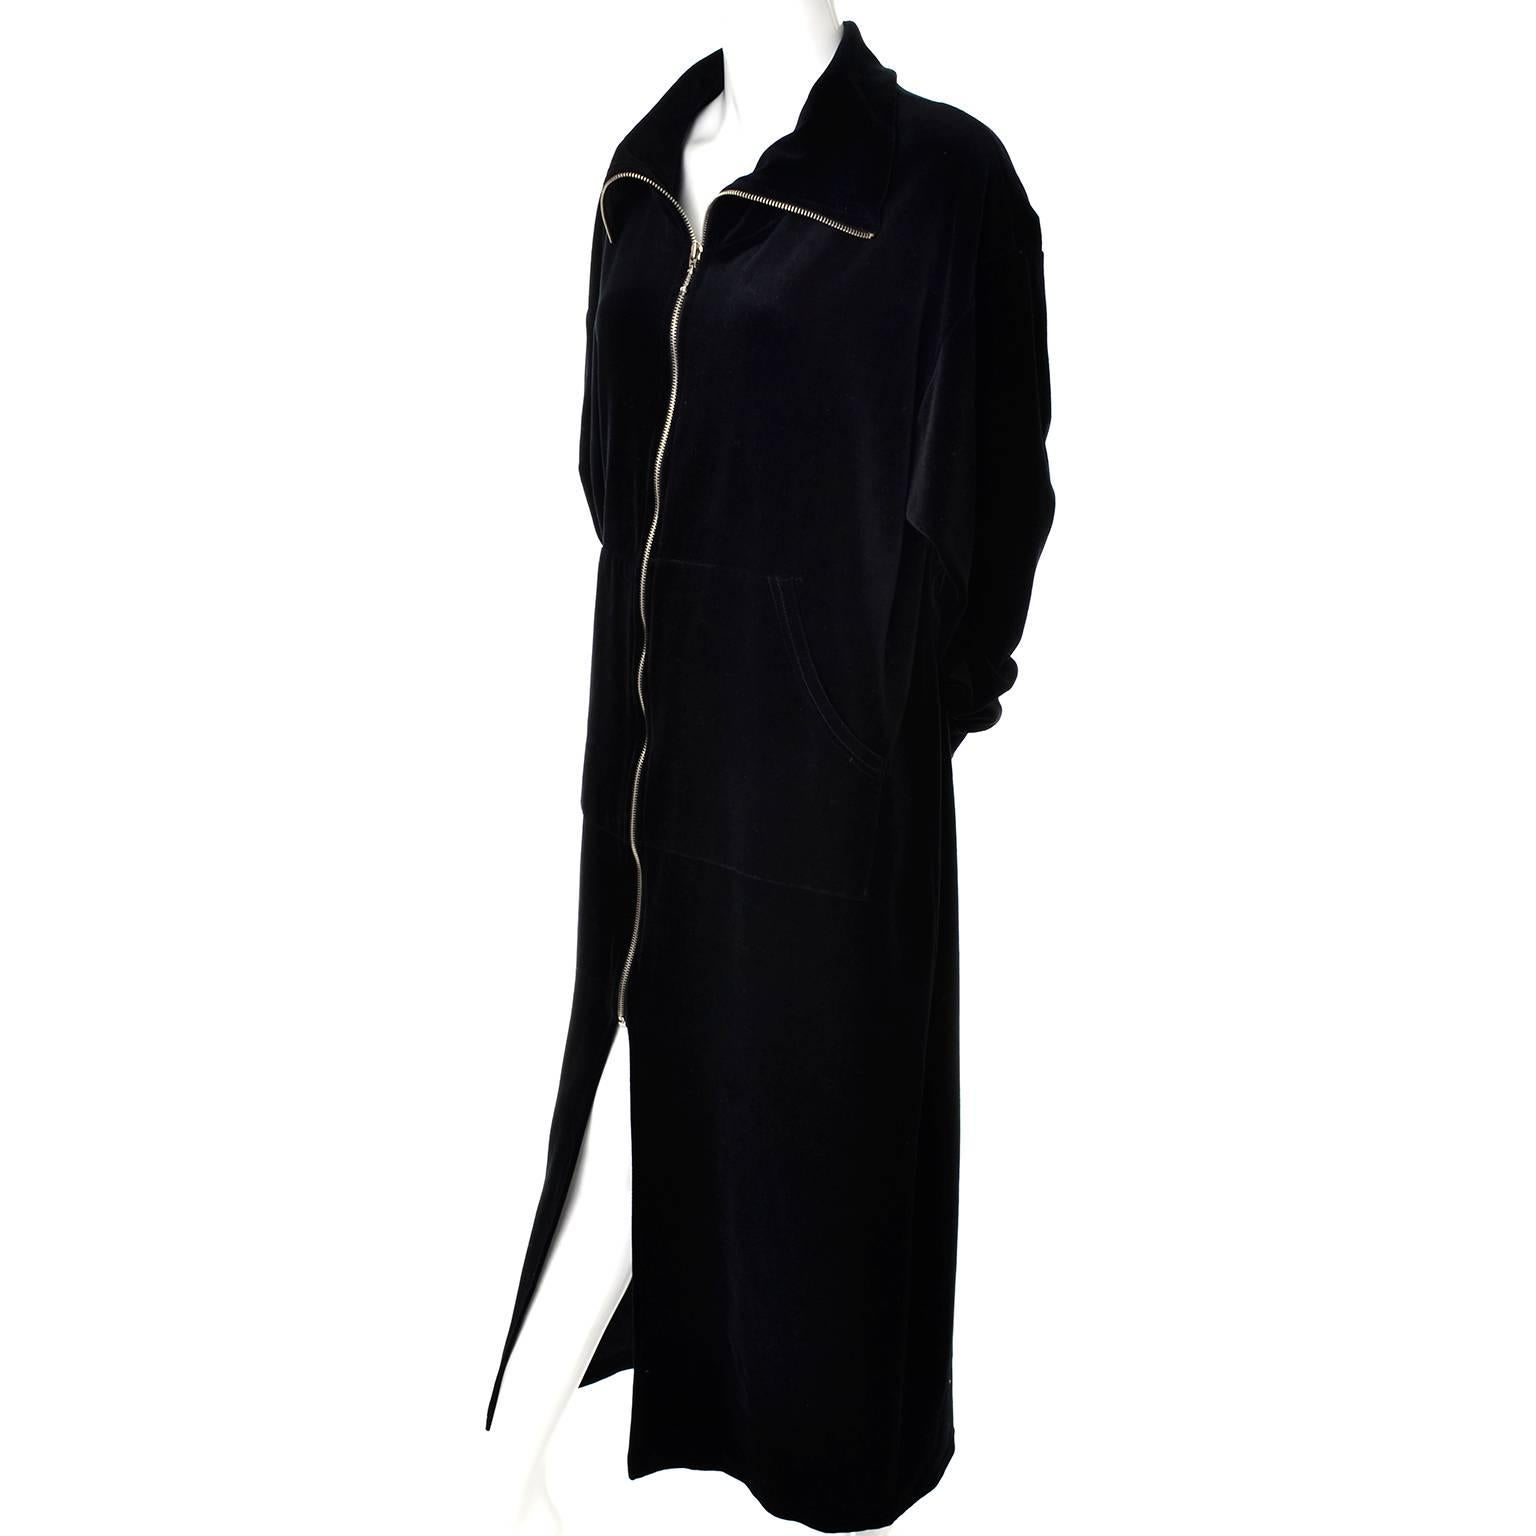 This is a plush Donna Karan Intimates size medium black velveteen zip front robe. This robe is in excellent condition and is 80% cotton and 20% poly.  There is a front slit from the bottom of zipper and the zipper can zip all the way up to form a